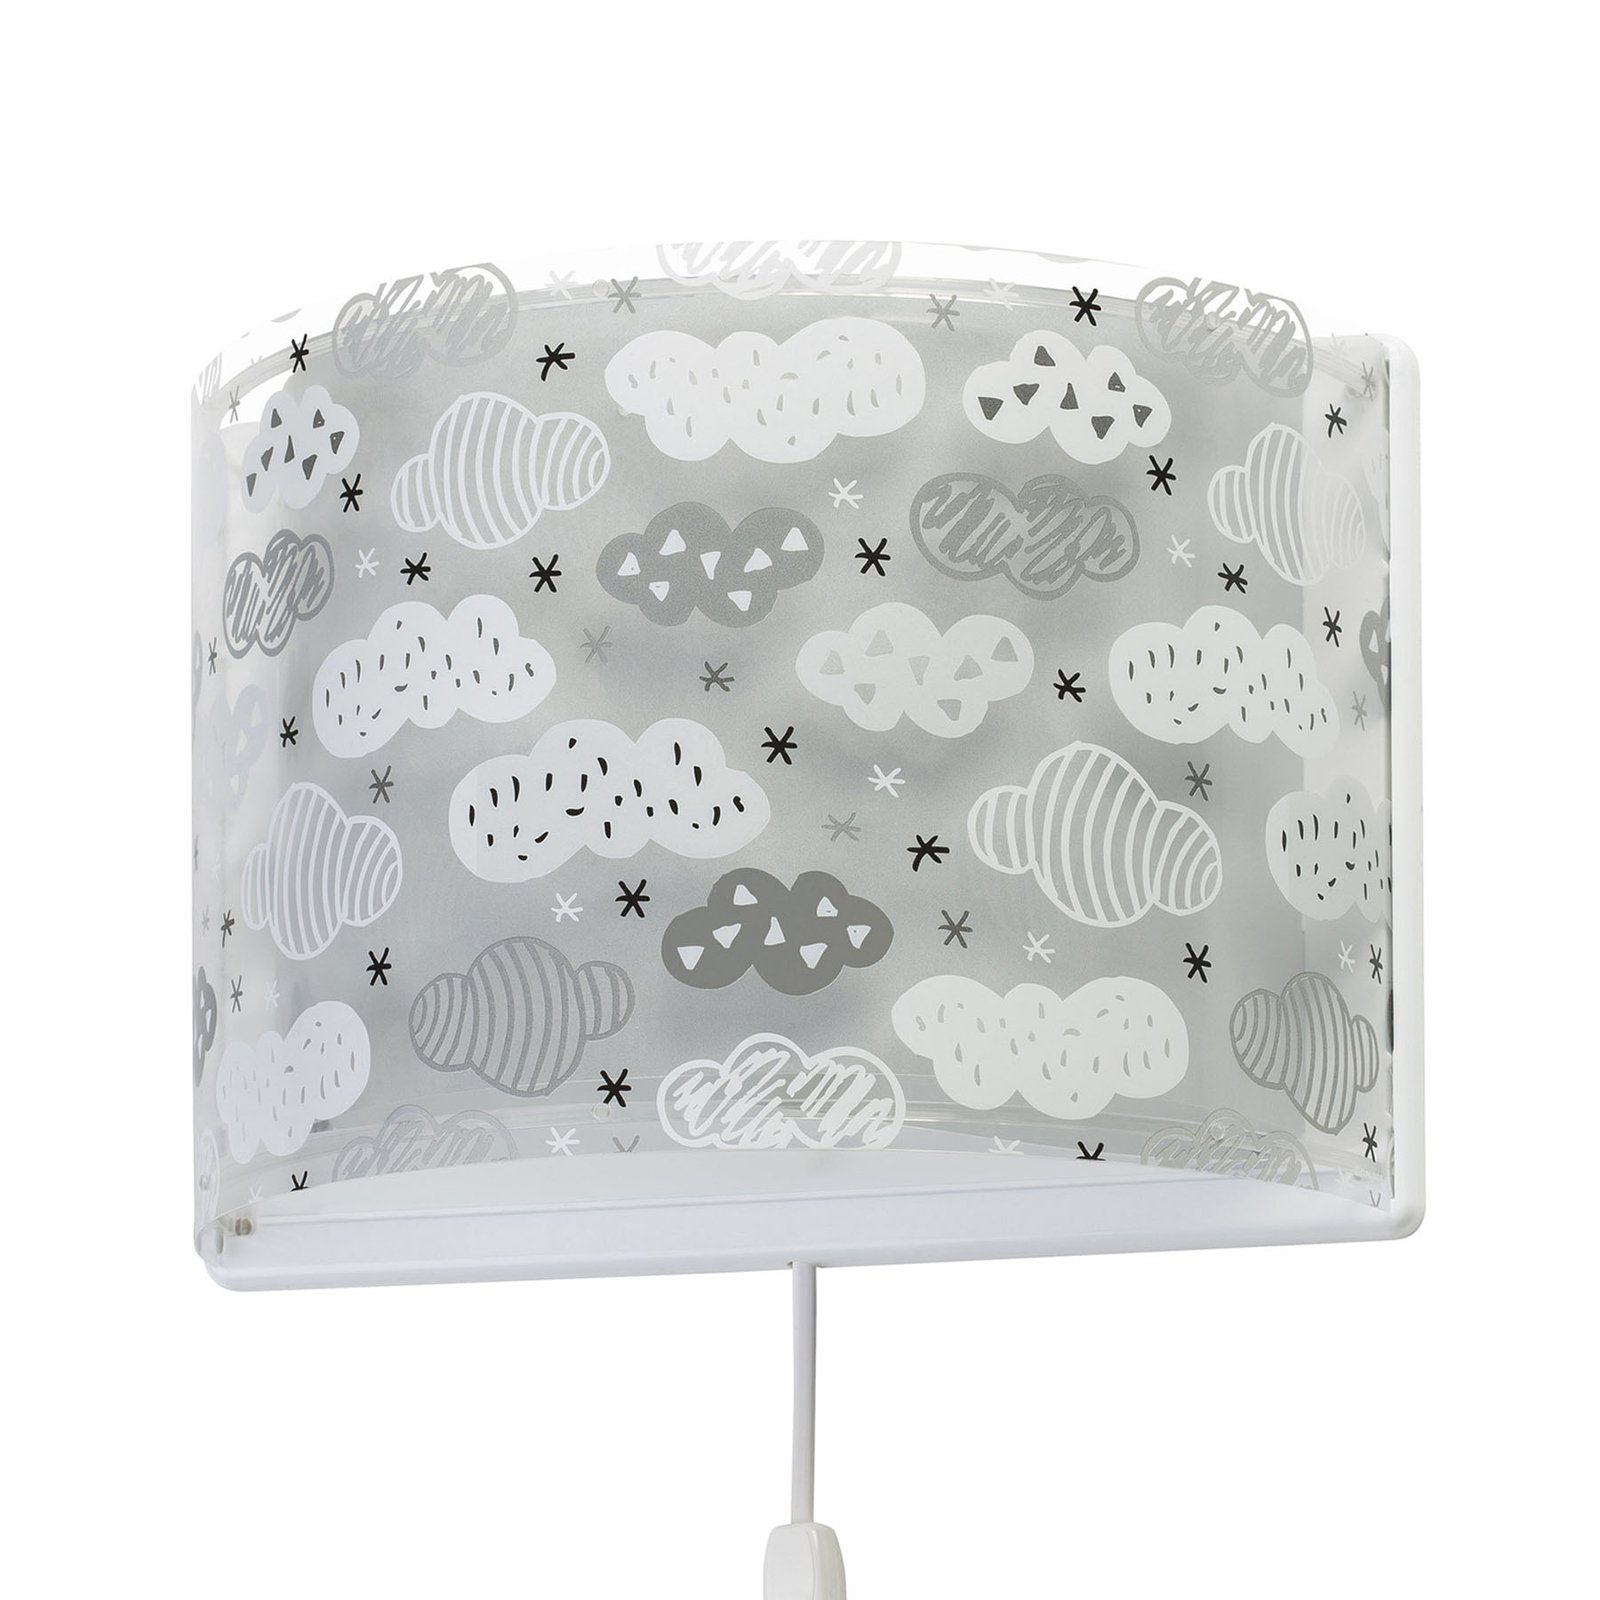 Clouds children’s wall light in grey